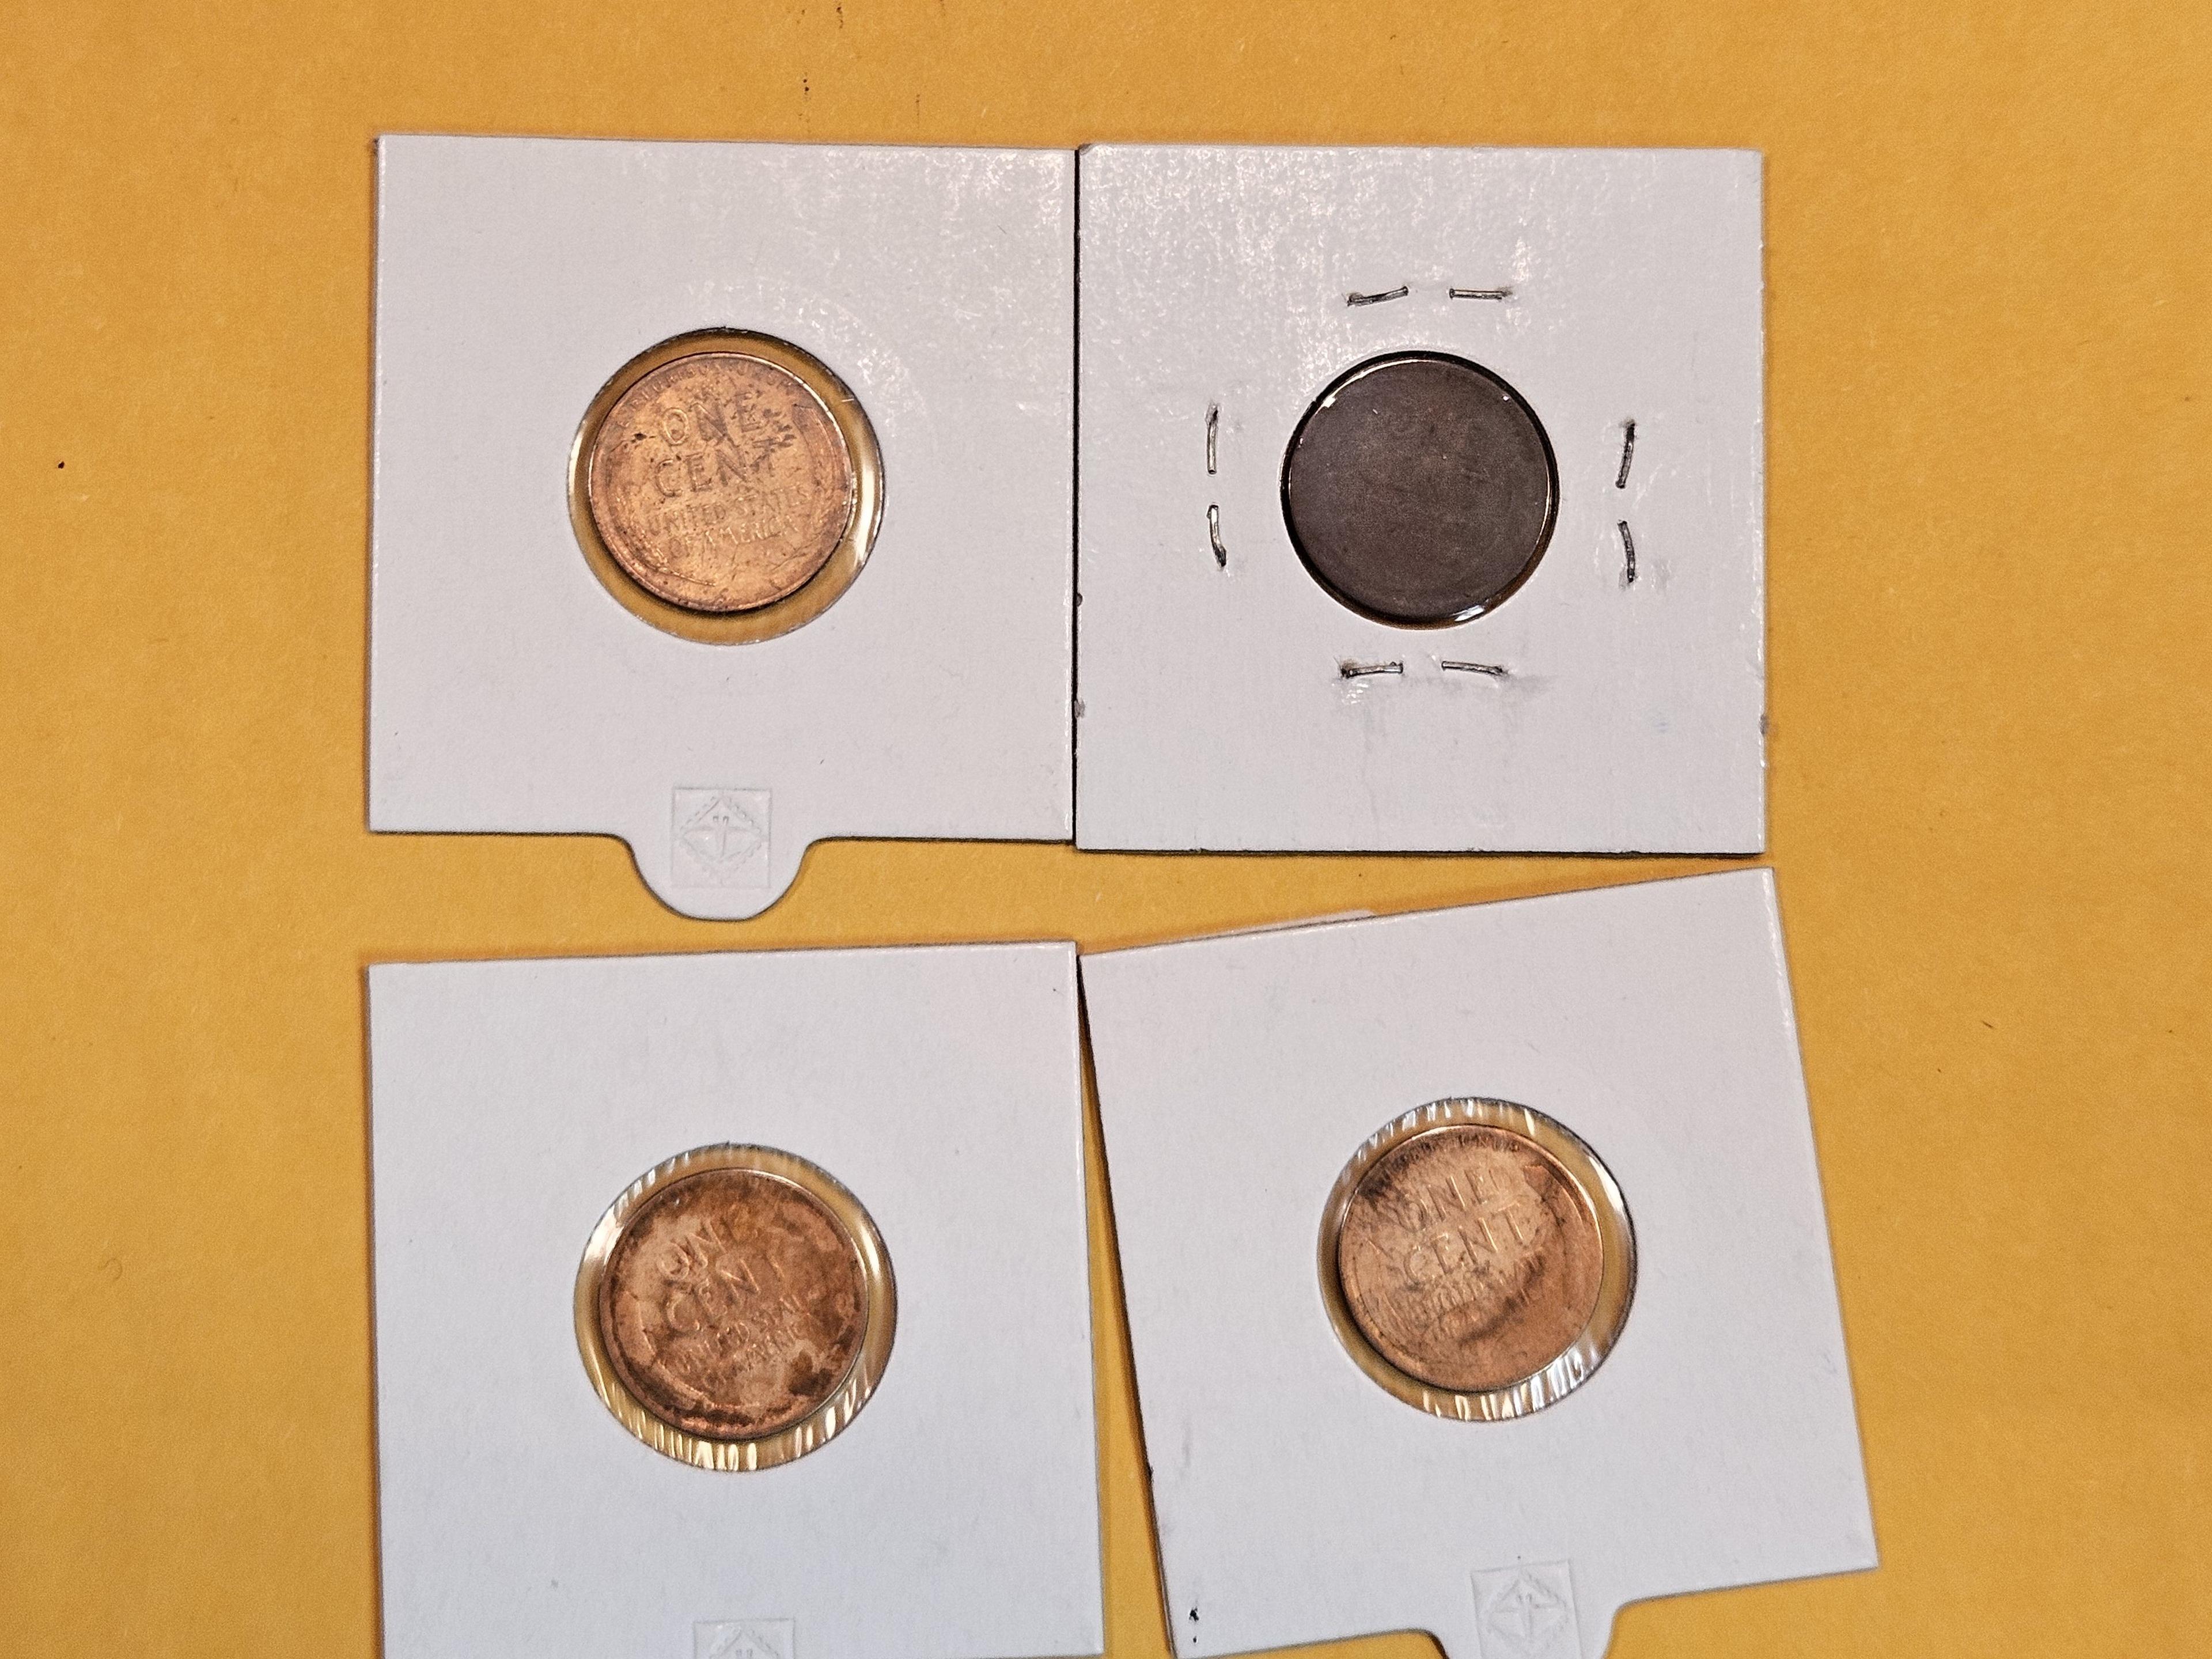 Four better date Wheat cents